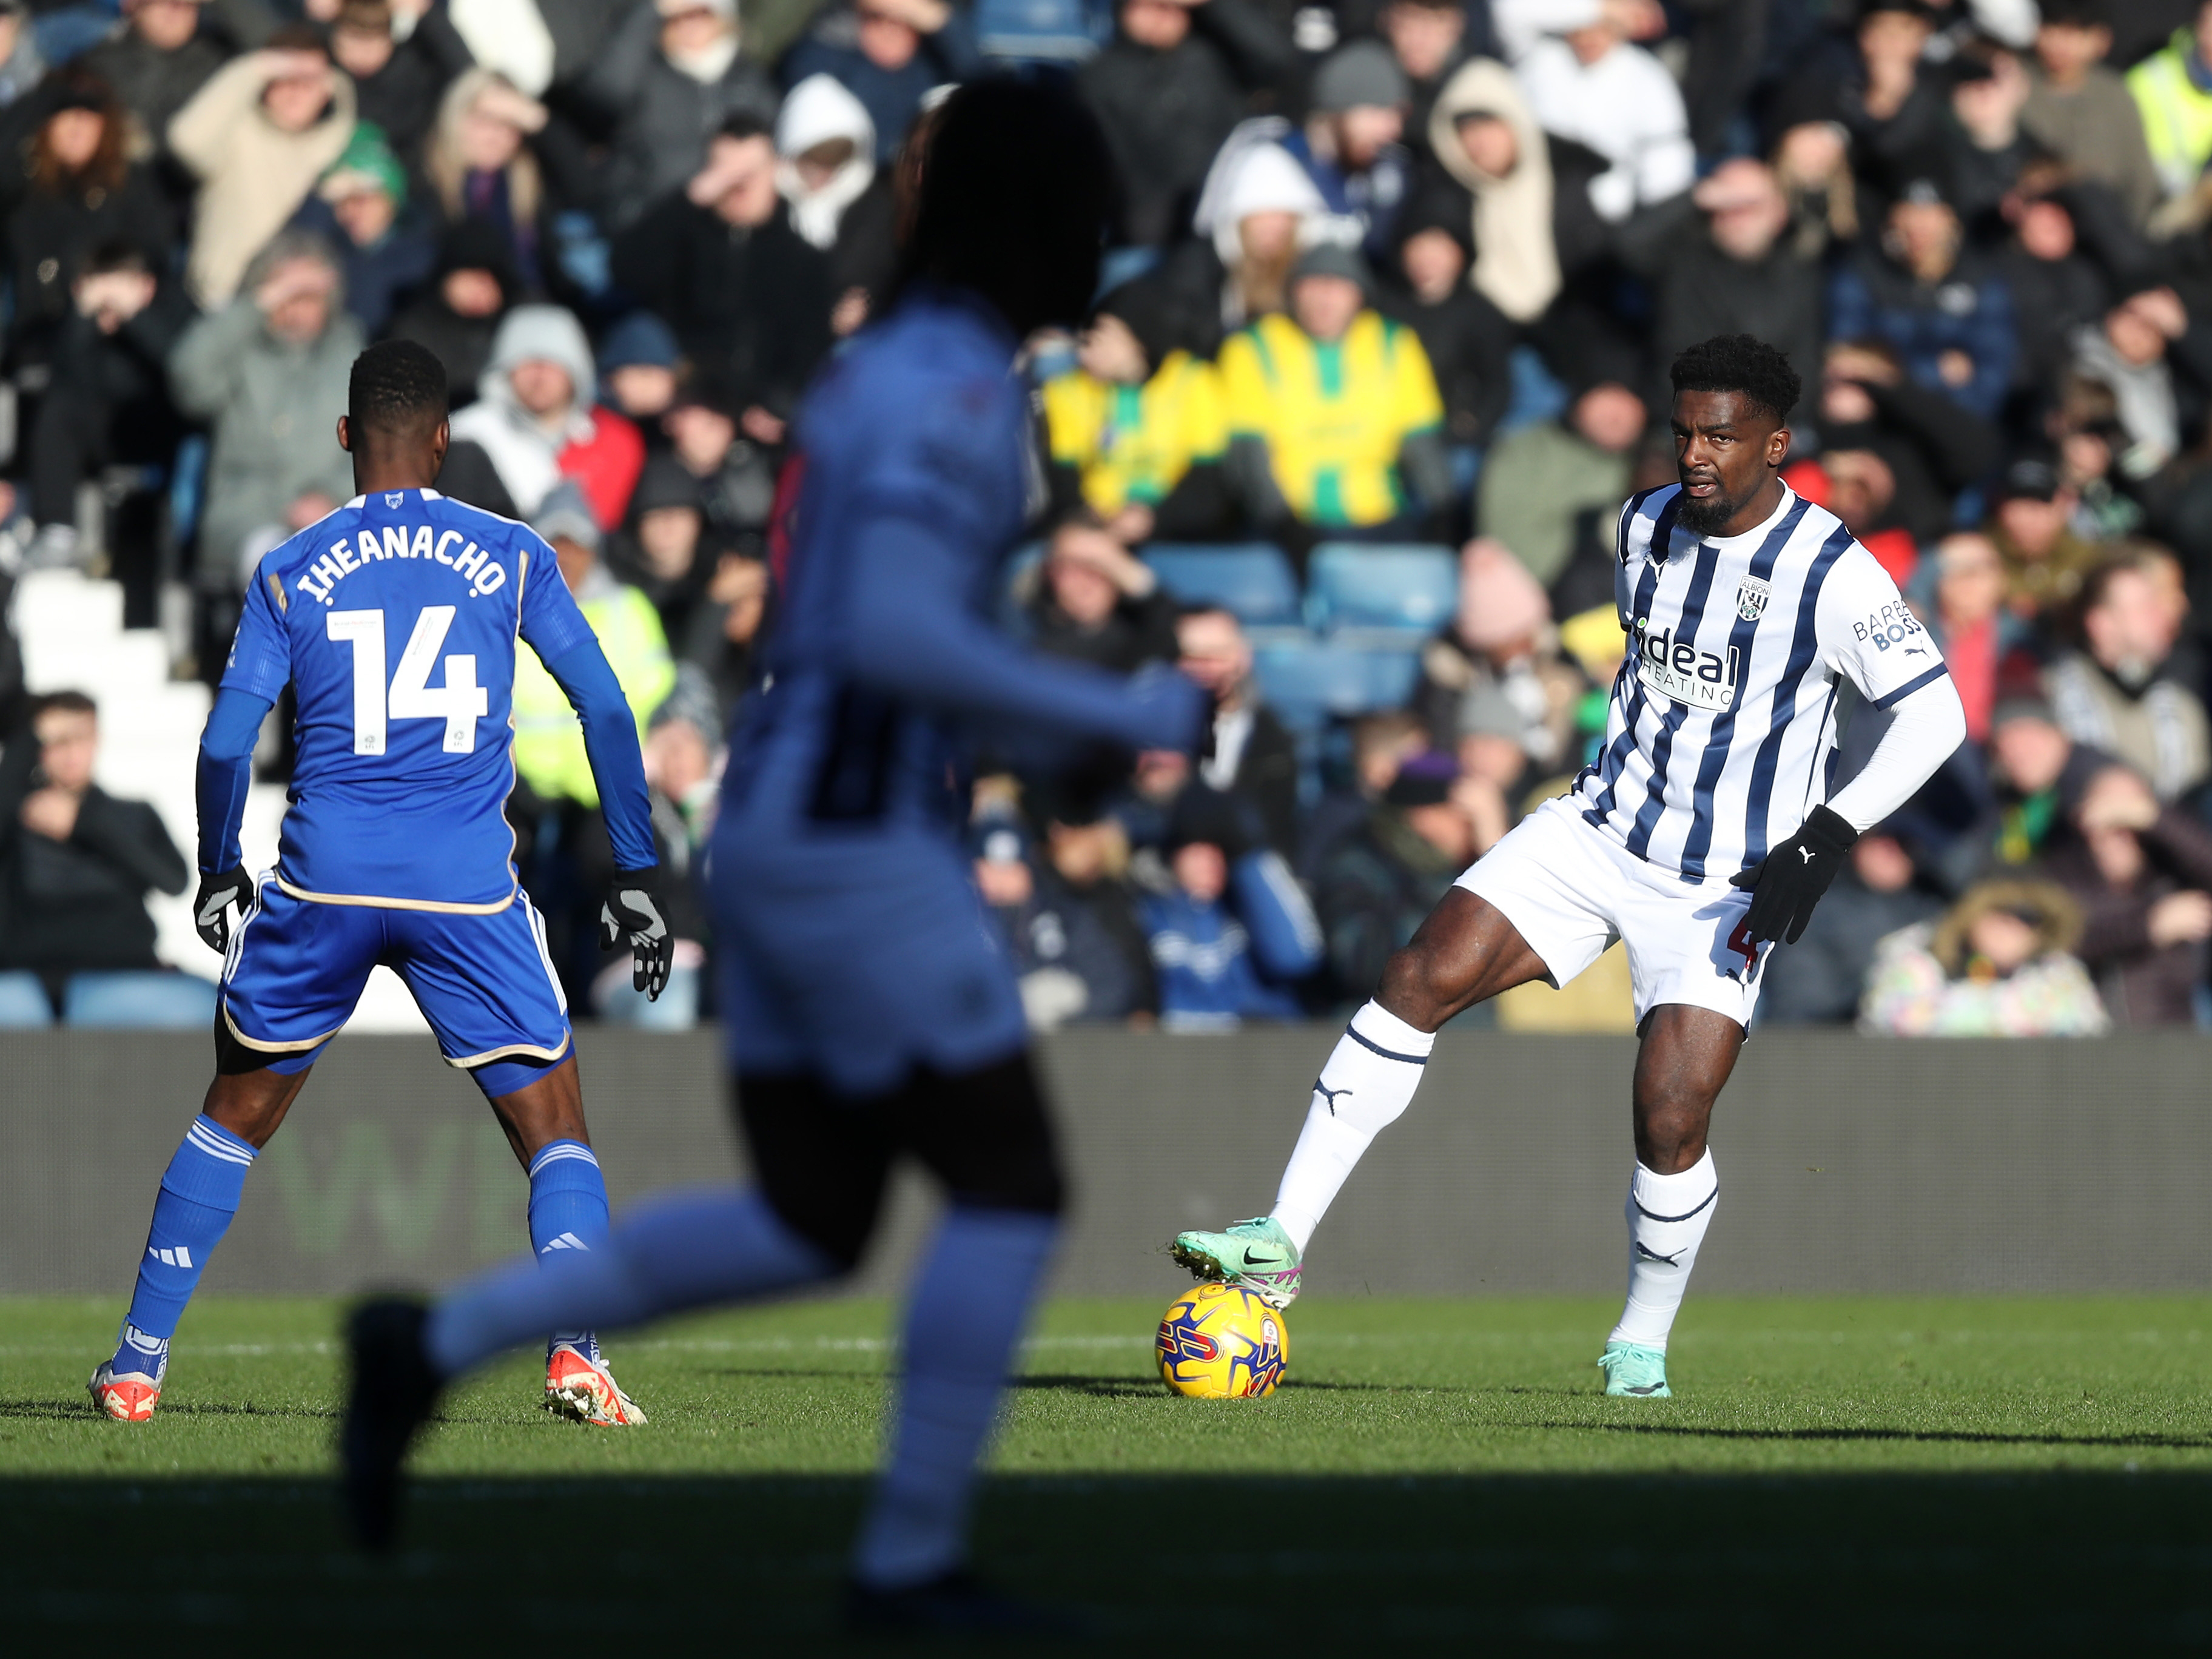 Match Report: West Bromwich Albion 1 - 2 Leicester City - Fosse Posse